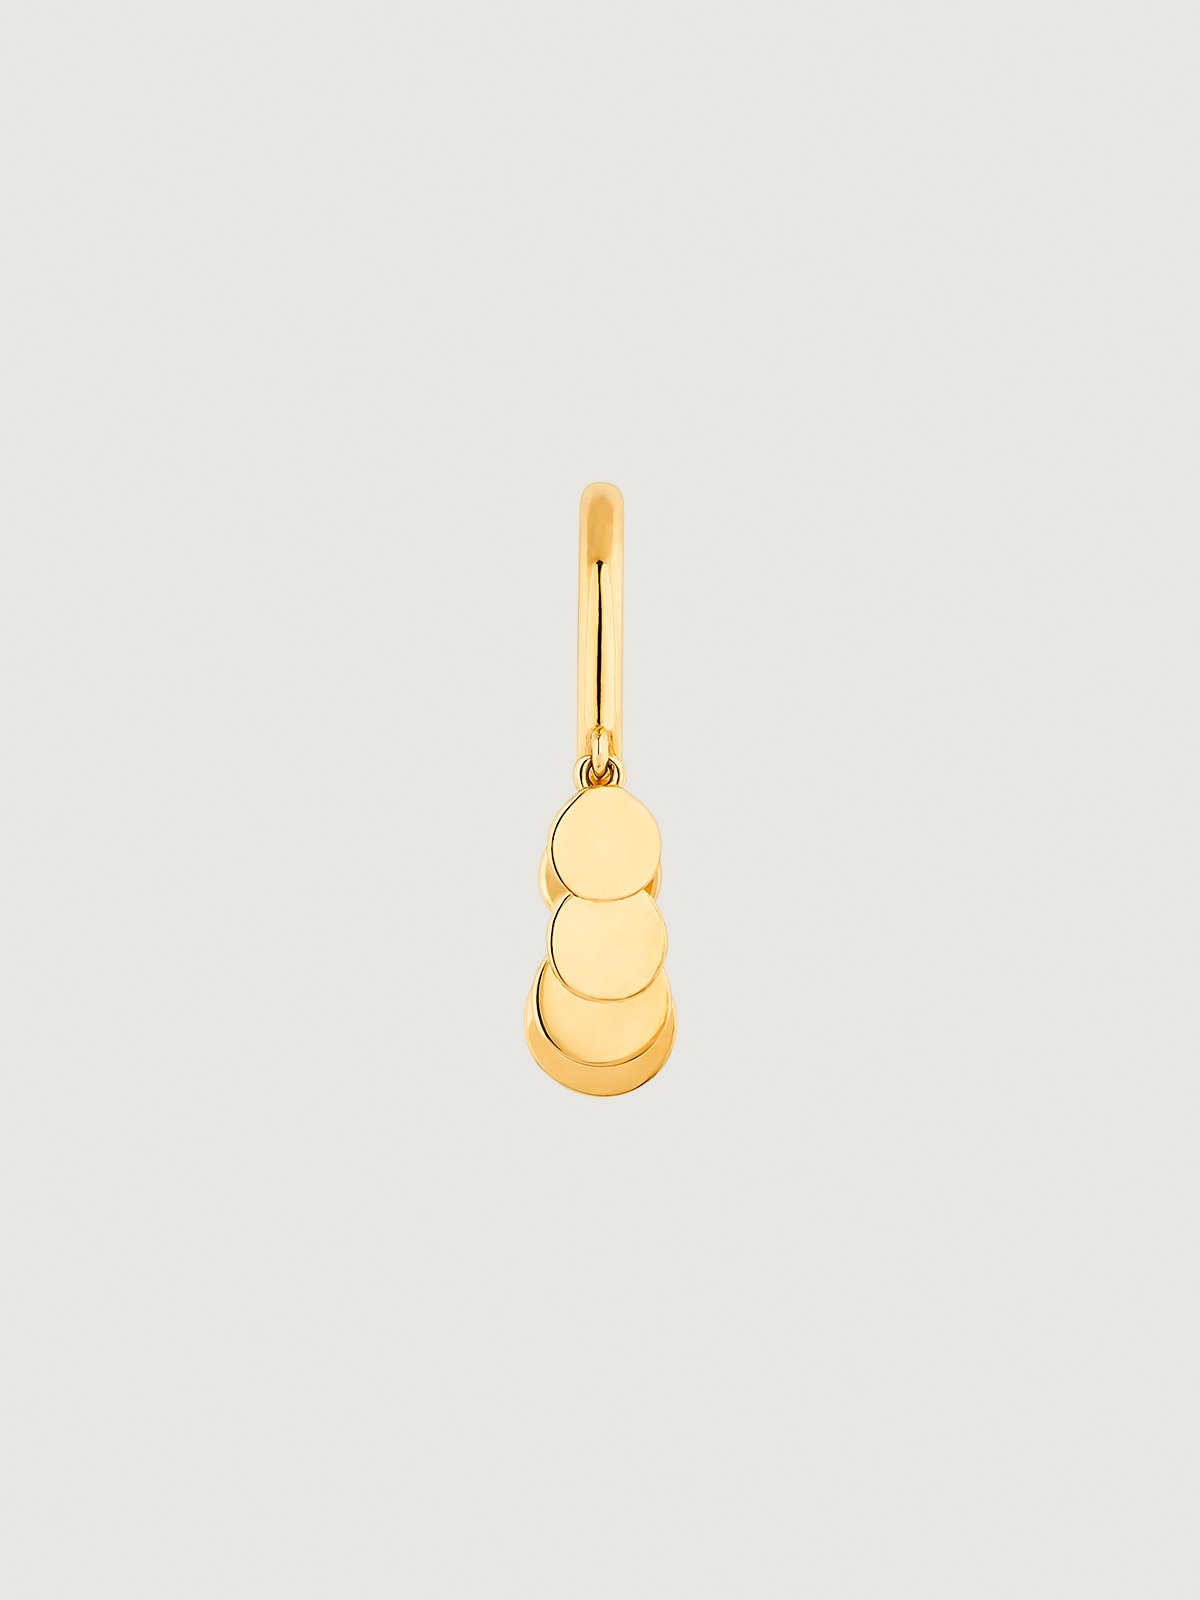 Individual 9K yellow gold earring with hanging spheres.